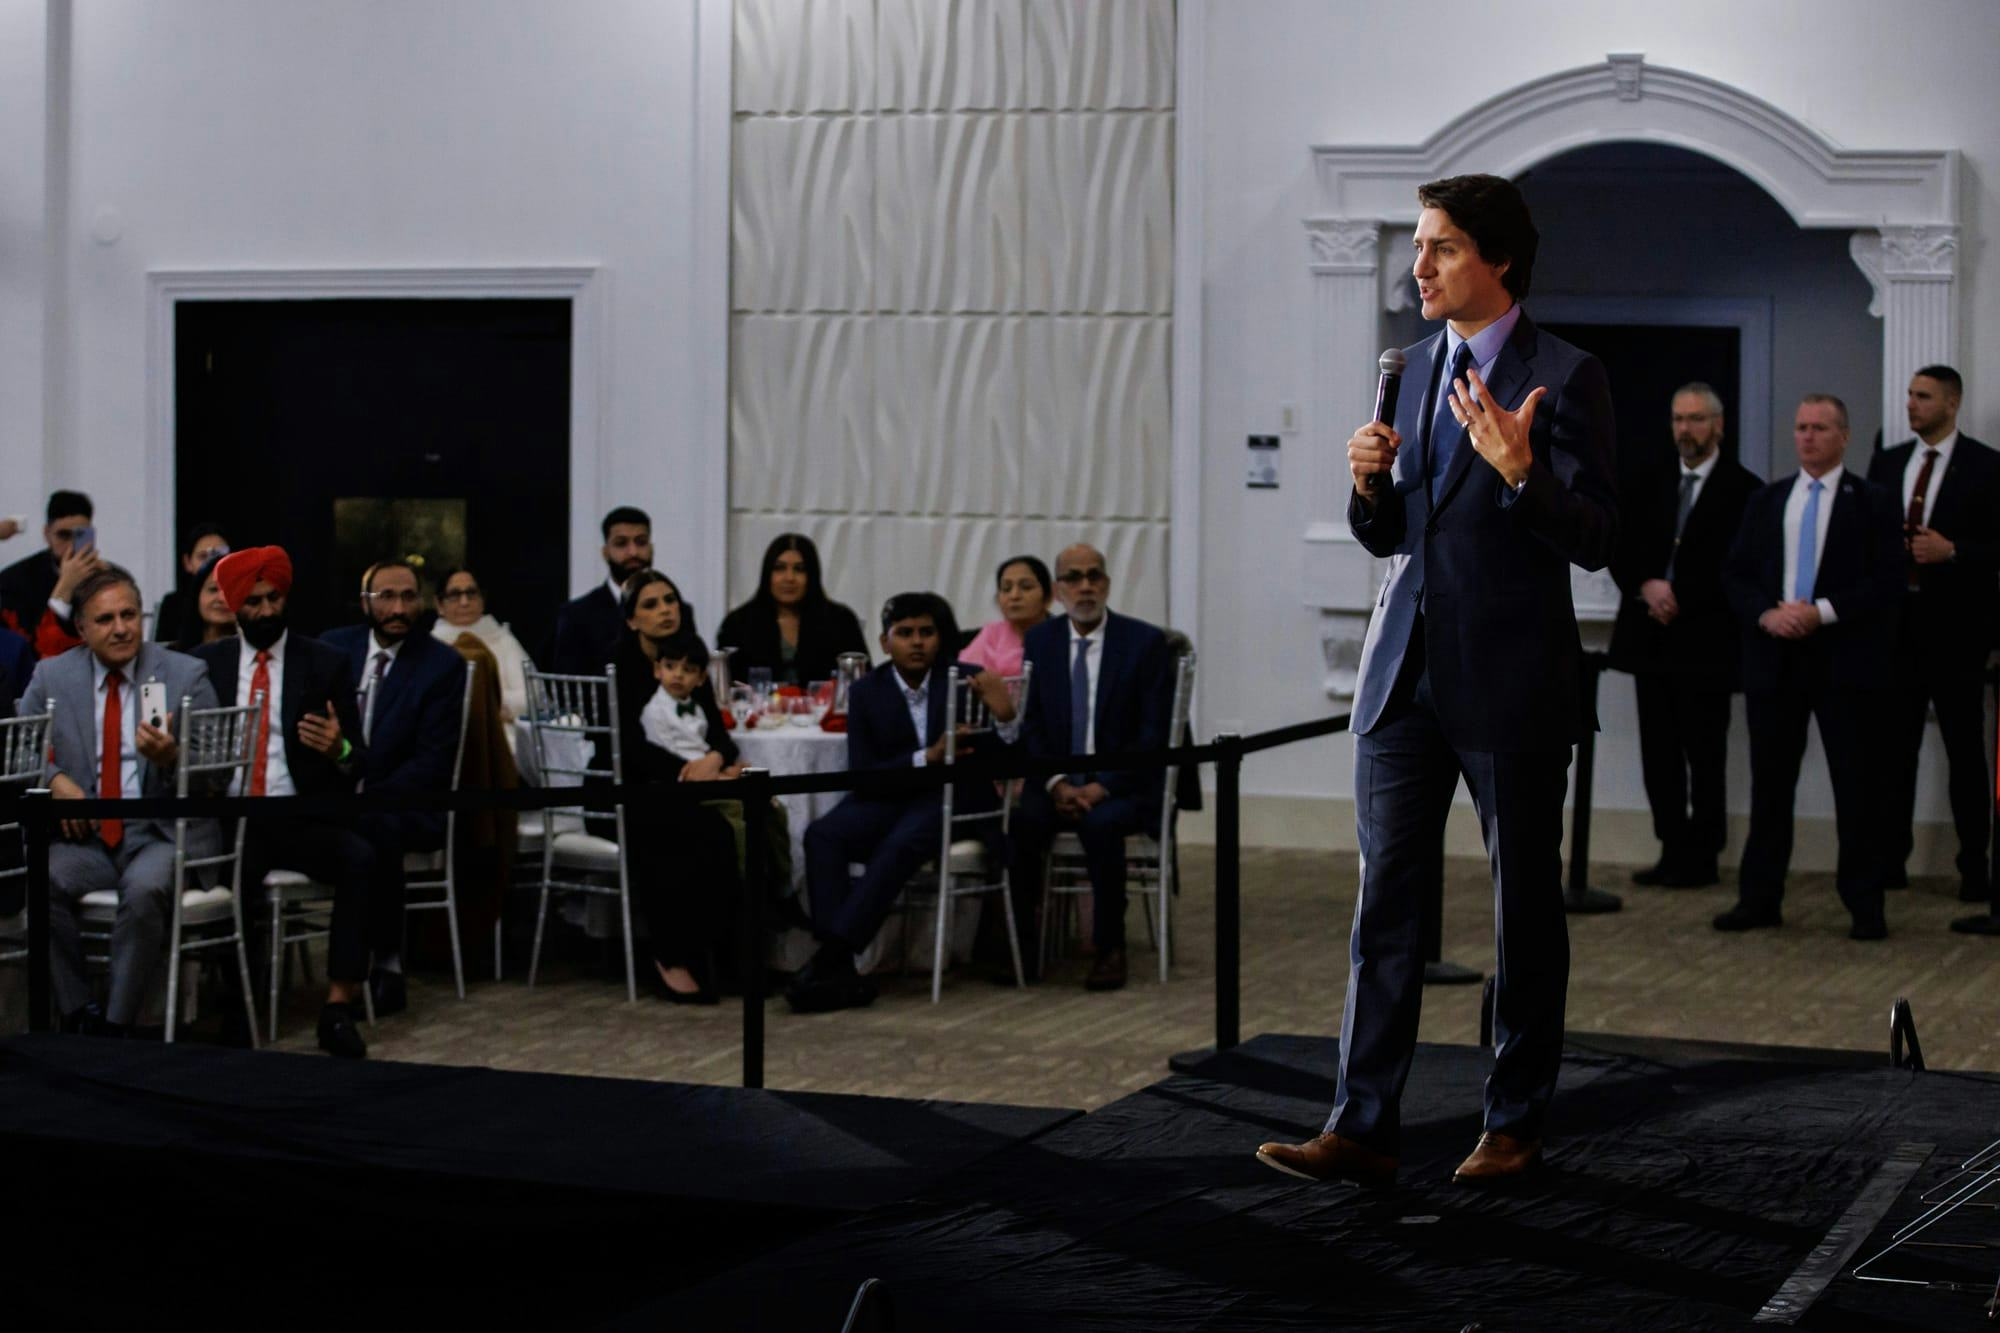 A photo of Justin Trudeau speaking to supporters in Brampton, Ont., at an event in February 2023.